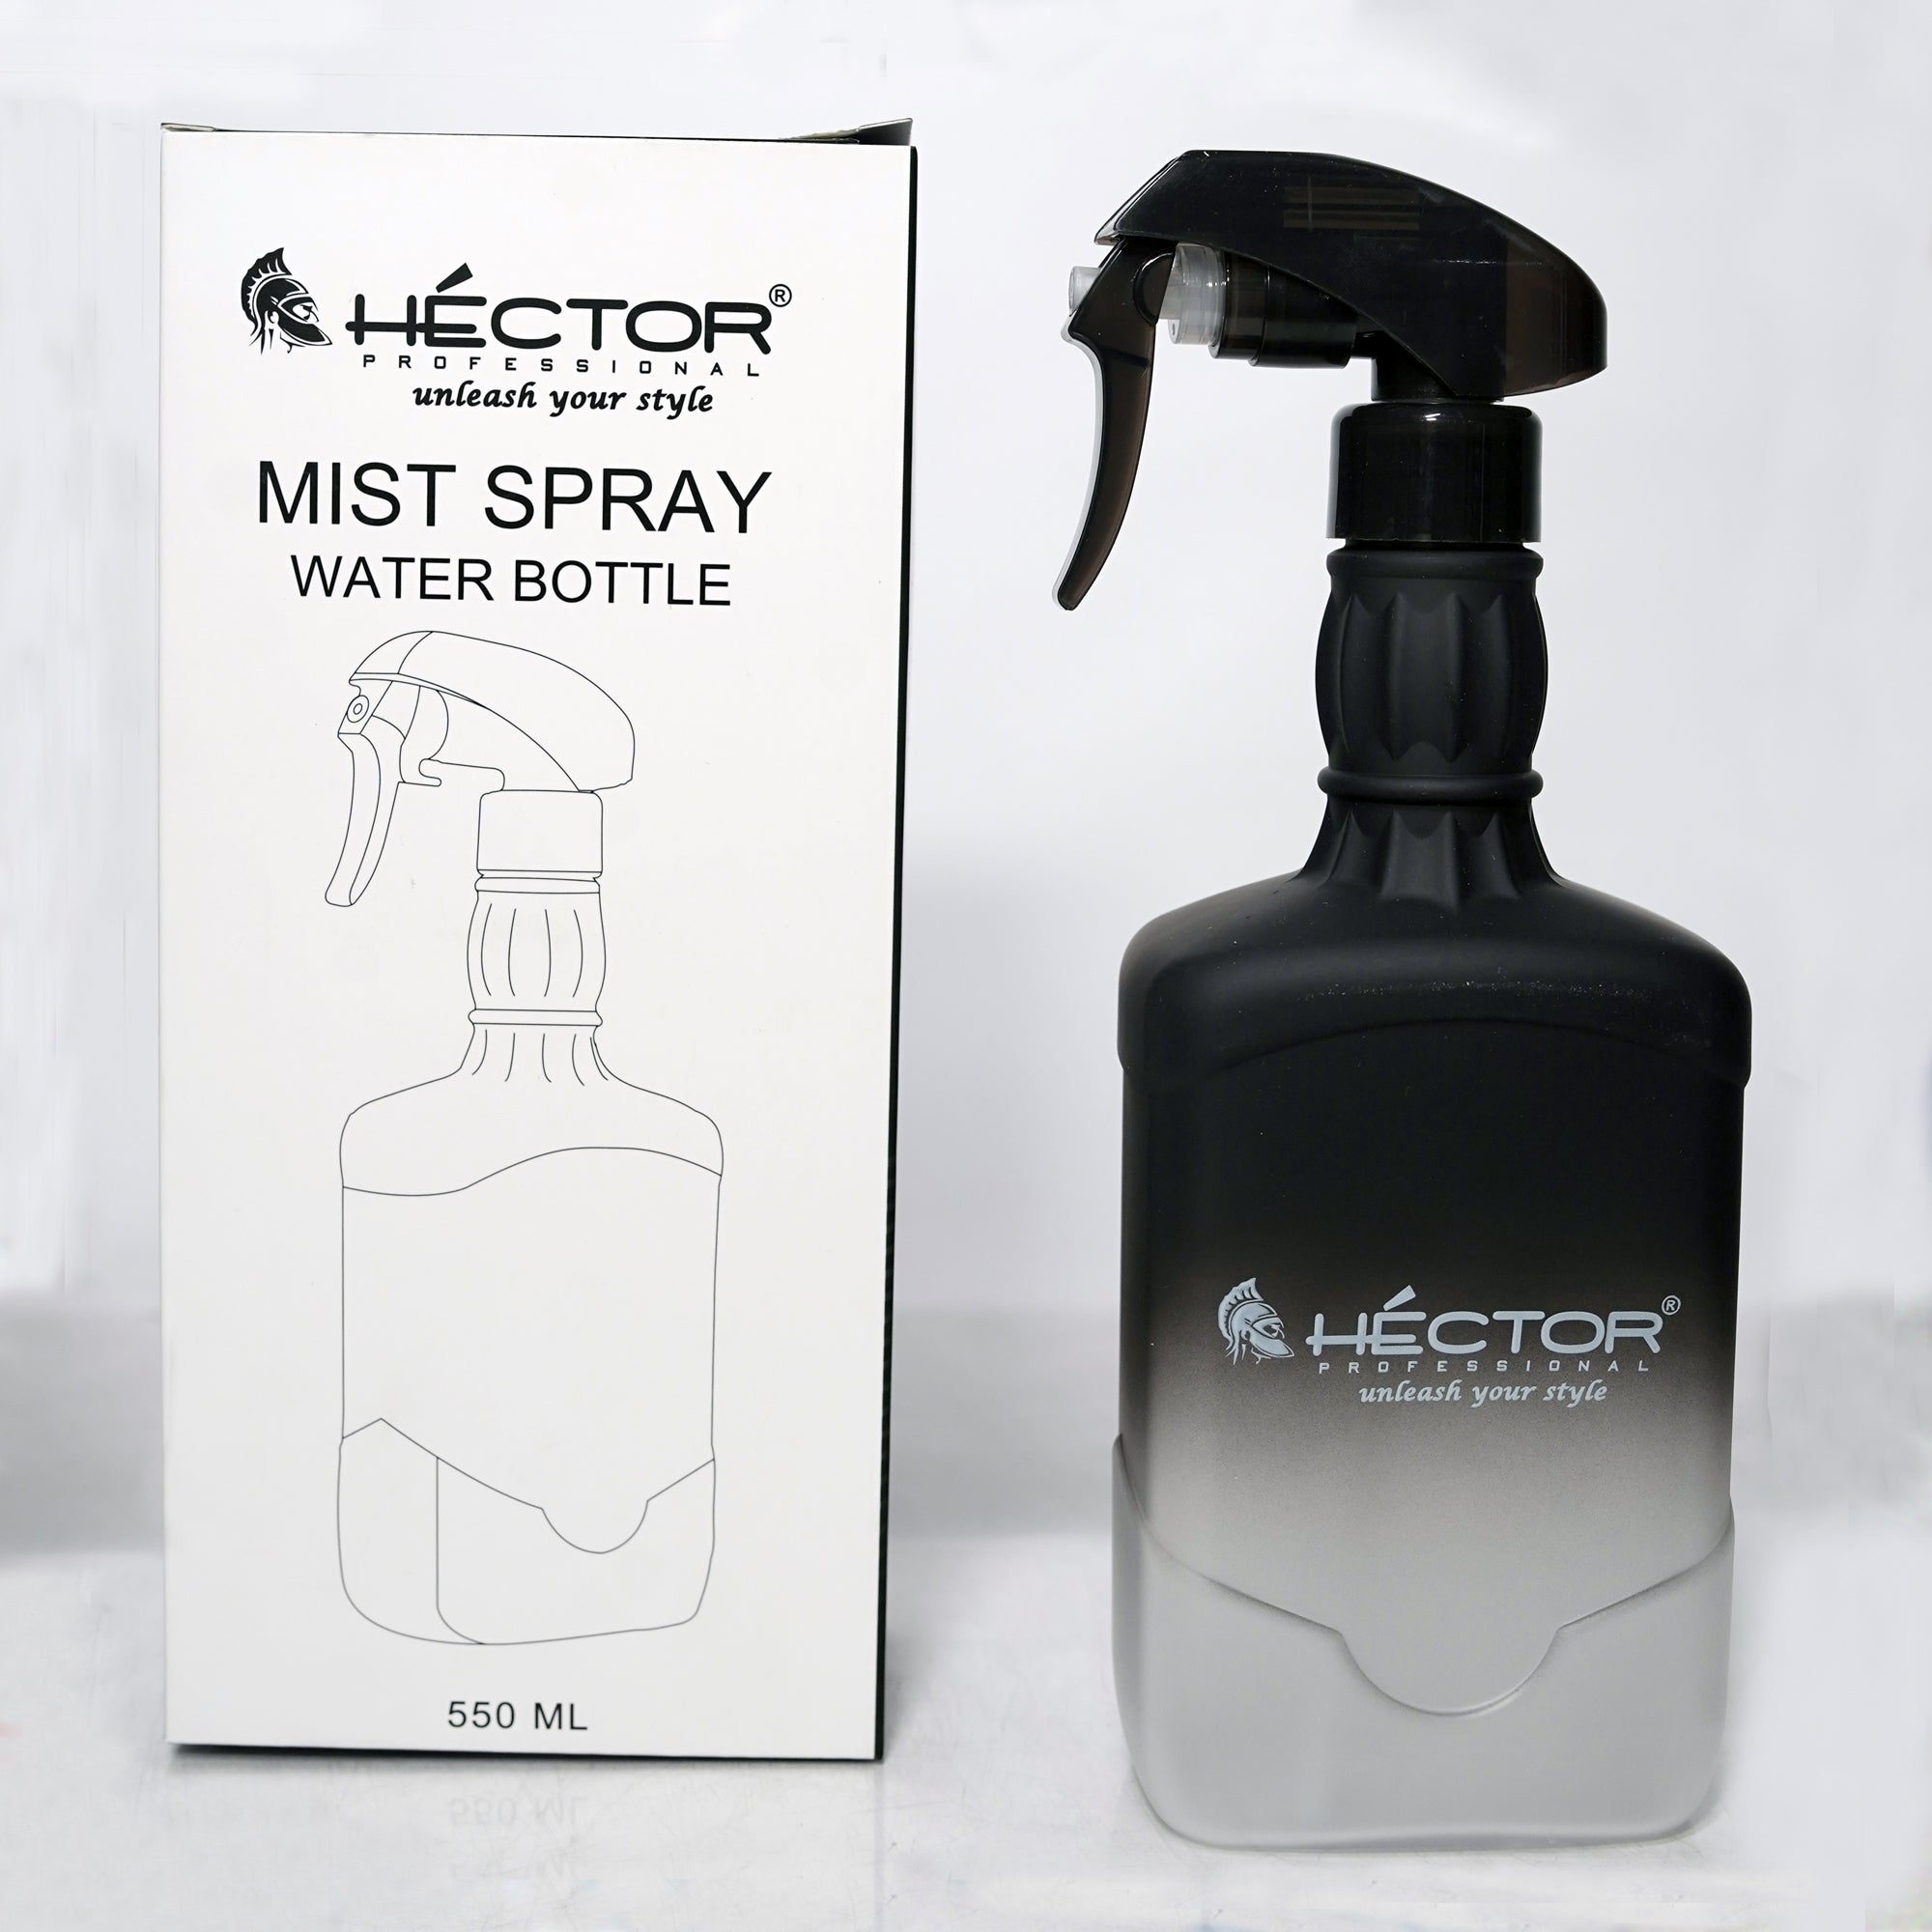 HECTOR Mist Spray Water Bottle For Hairstyling | Salon Use | Ironing | Plant Misting | Gadget & Car Cleaning | Dispensing Sanitizer | 550 ML Empty Bottle For Salon & Home | Pack of 2 Bottles